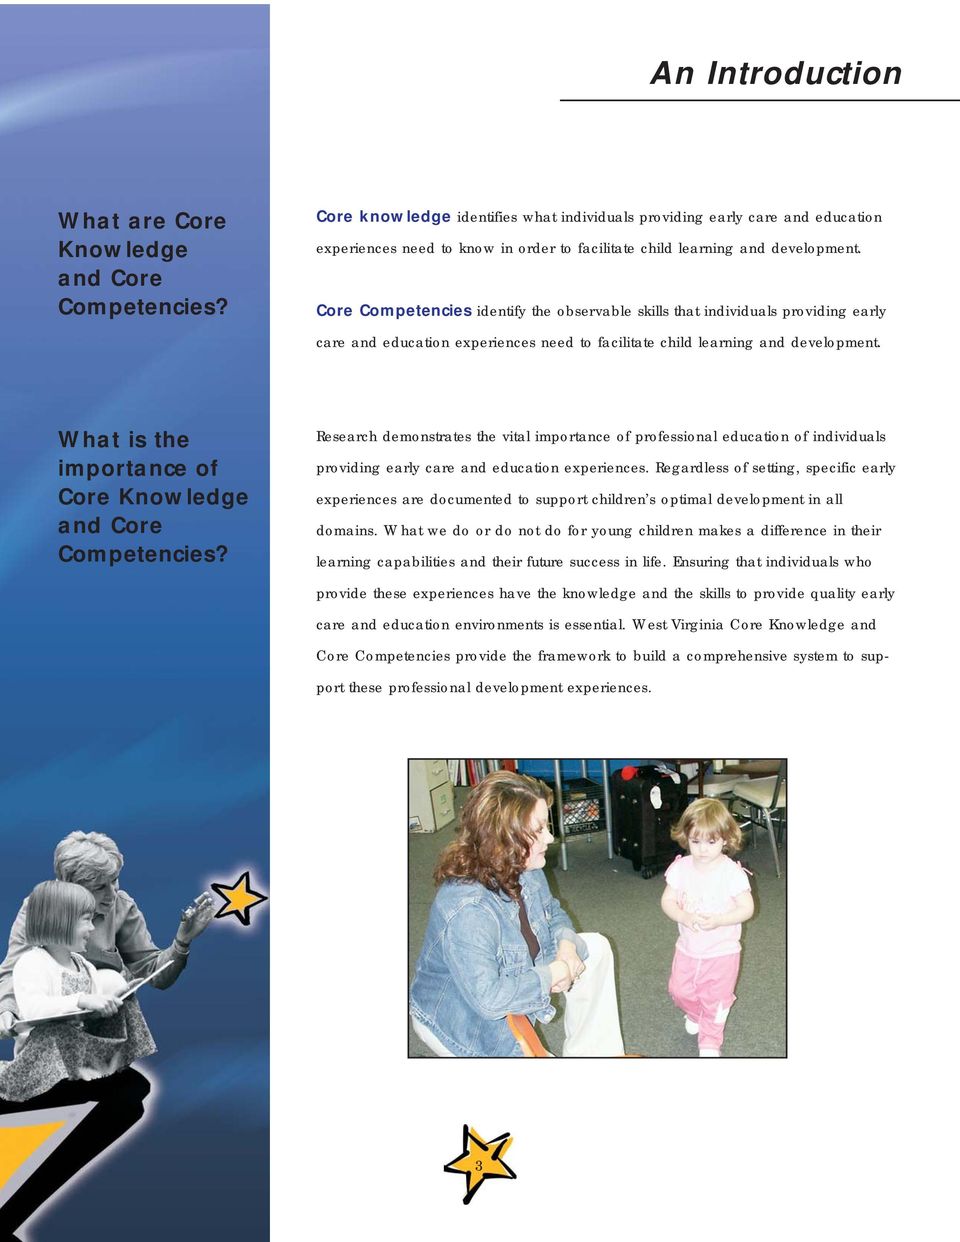 Core Competencies identify the observable skills that individuals providing early care and education experiences need to facilitate child learning and development.